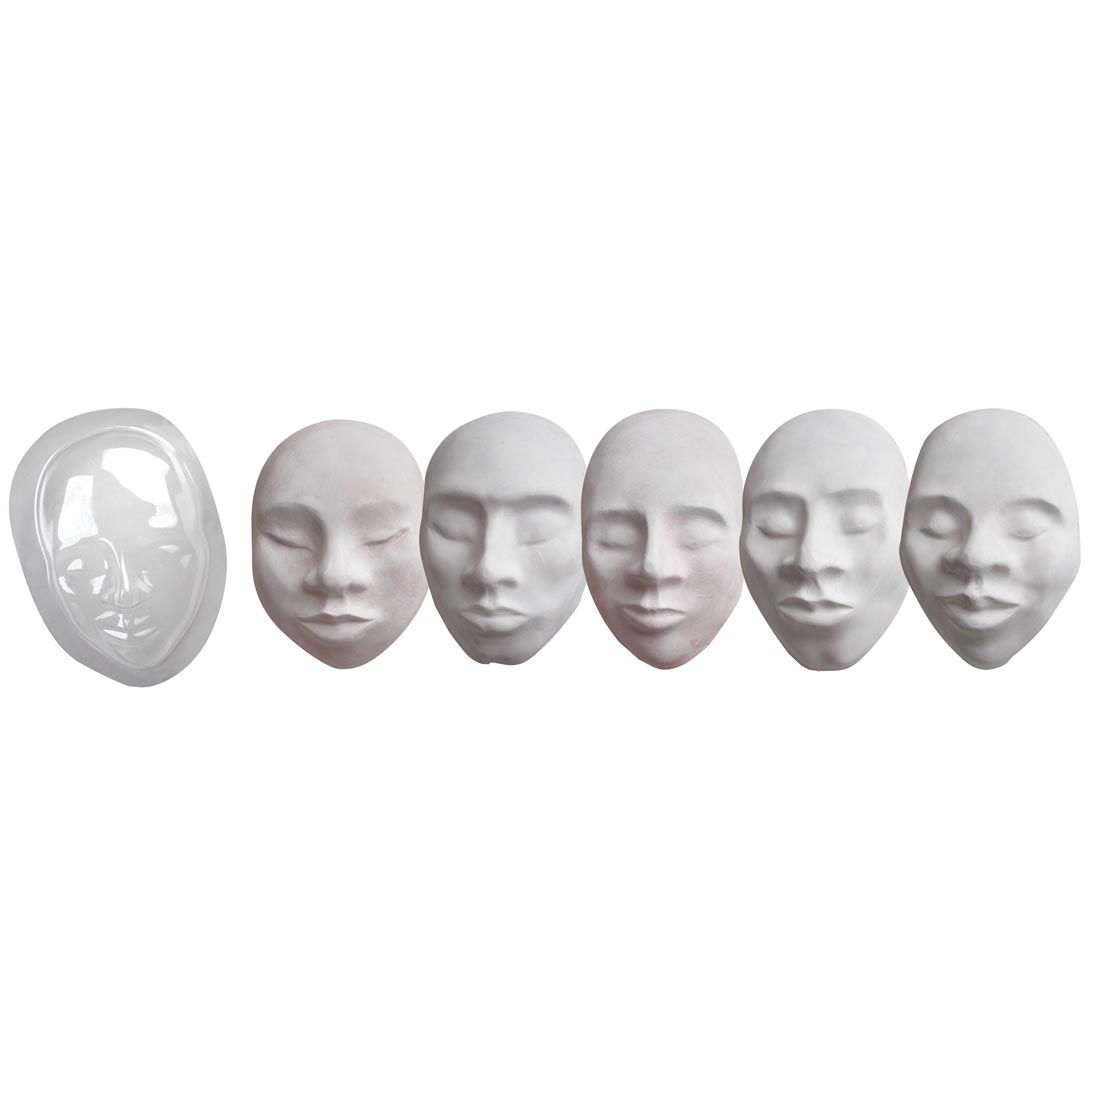 One blank Roylco Multicultural Face Form is shown with five completed examples